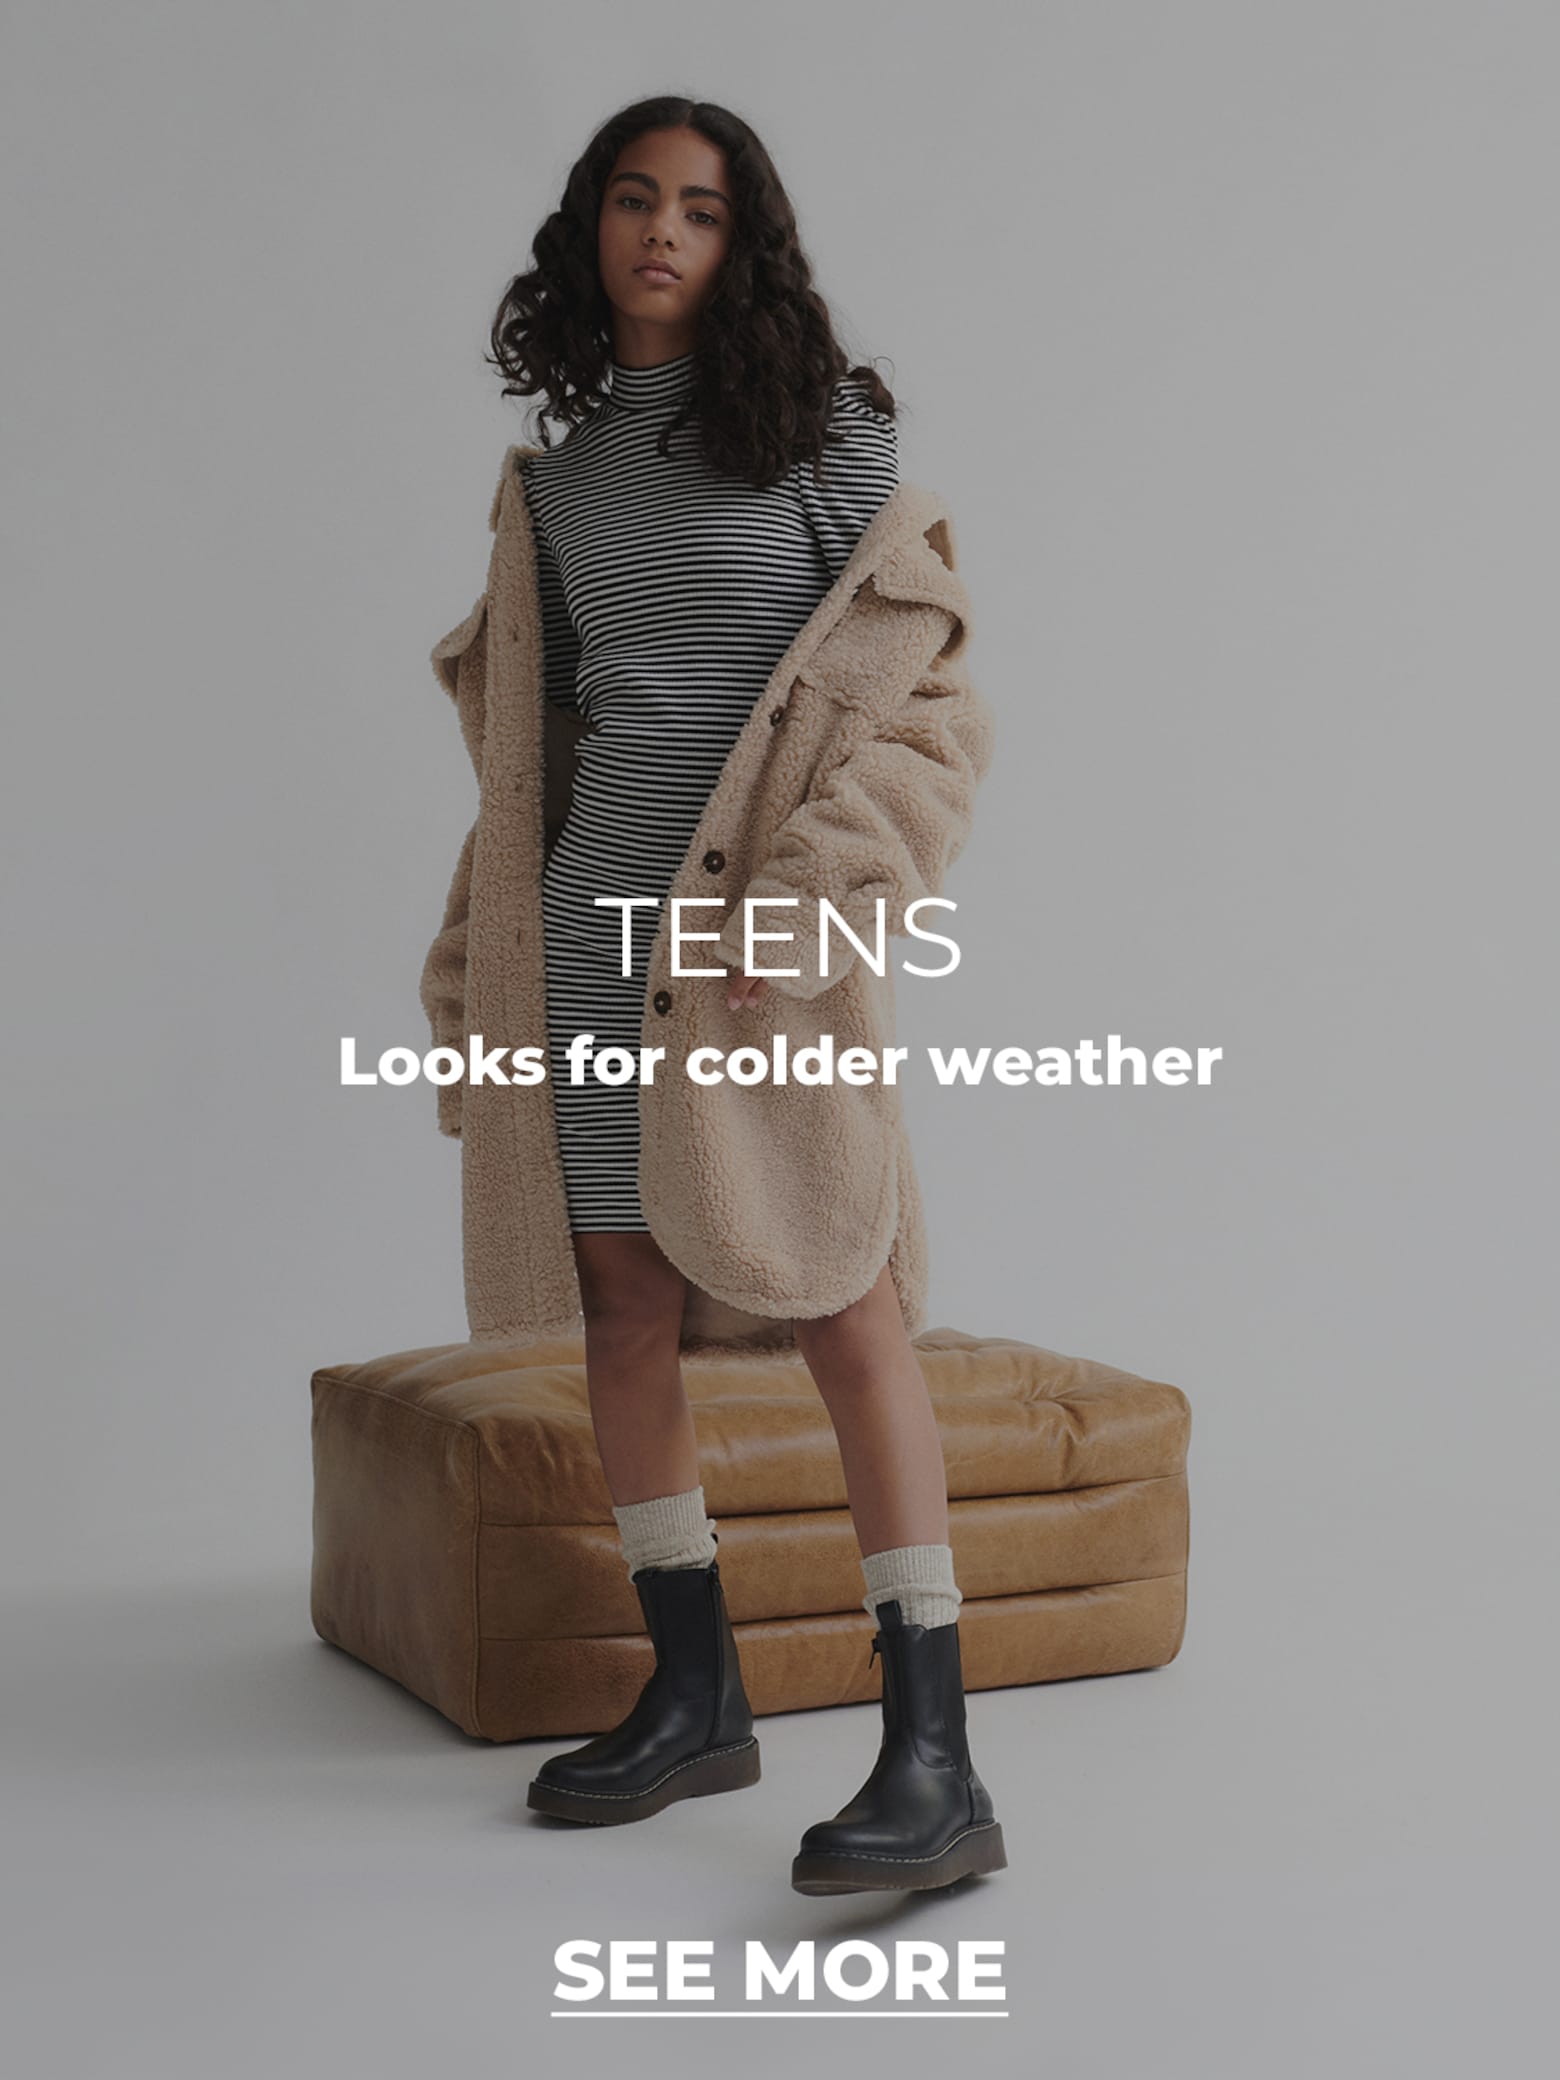 For our girls Clothing for colder days